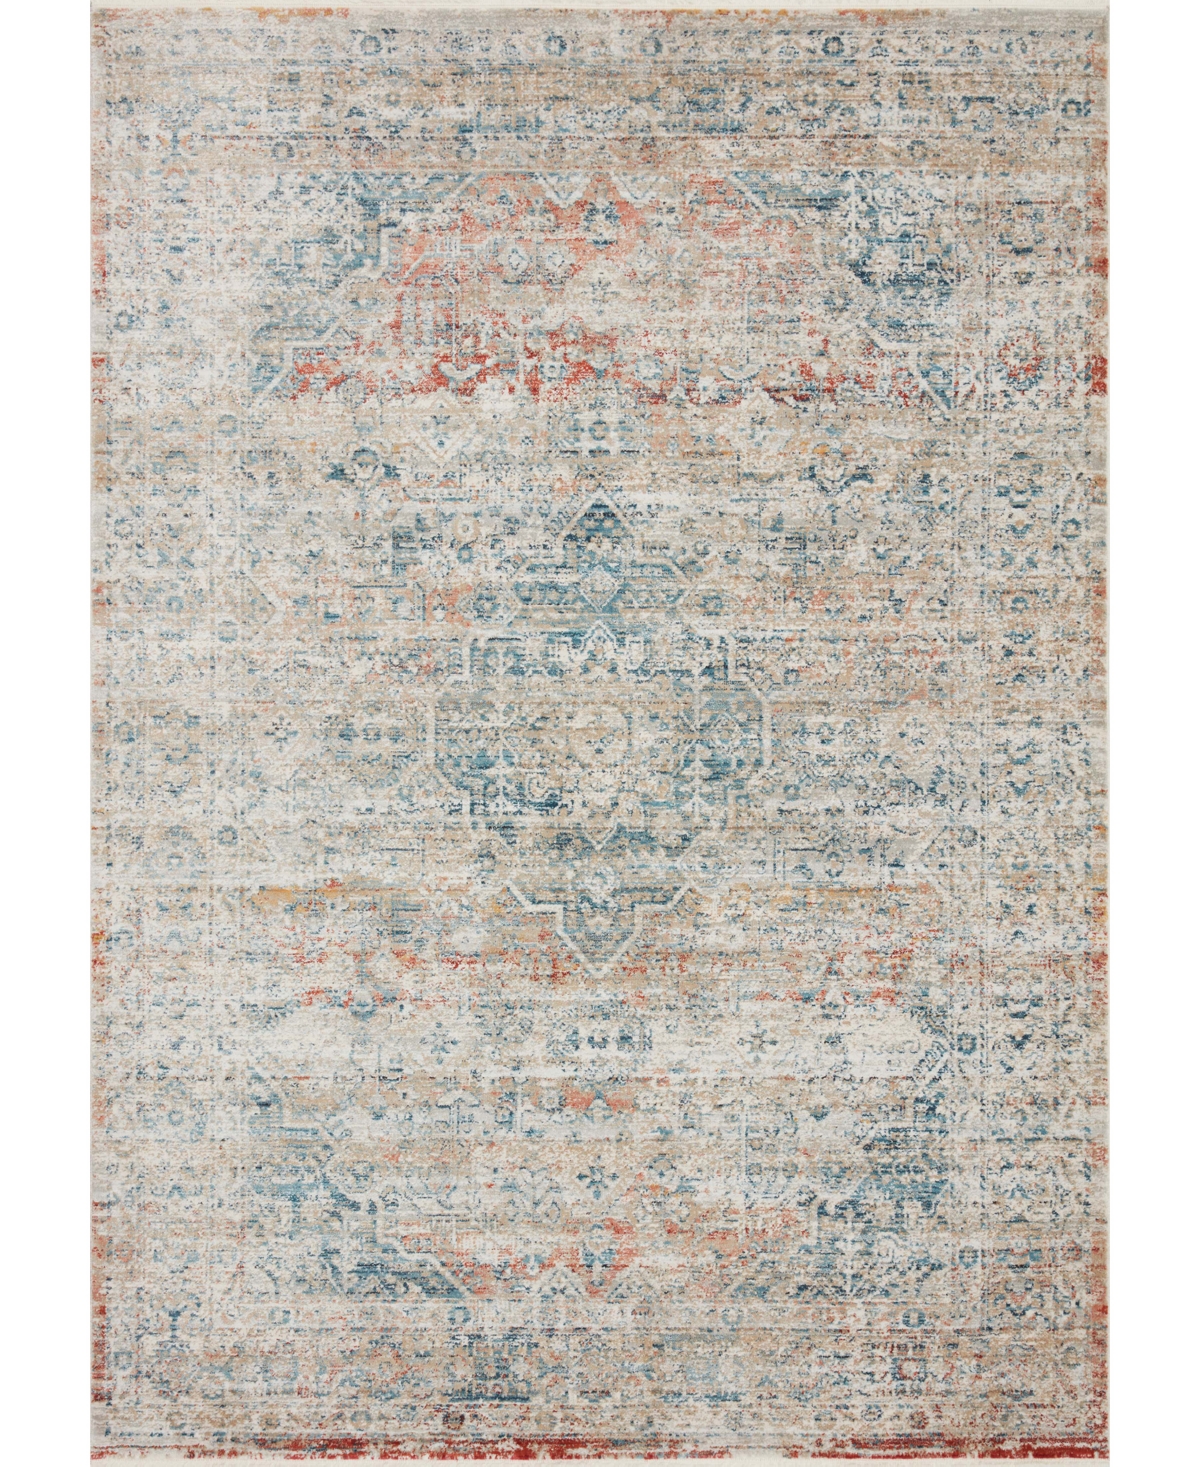 Magnolia Home By Joanna Gaines X Loloi Elise Eli-03 2'8" X 4' Area Rug In Neutral